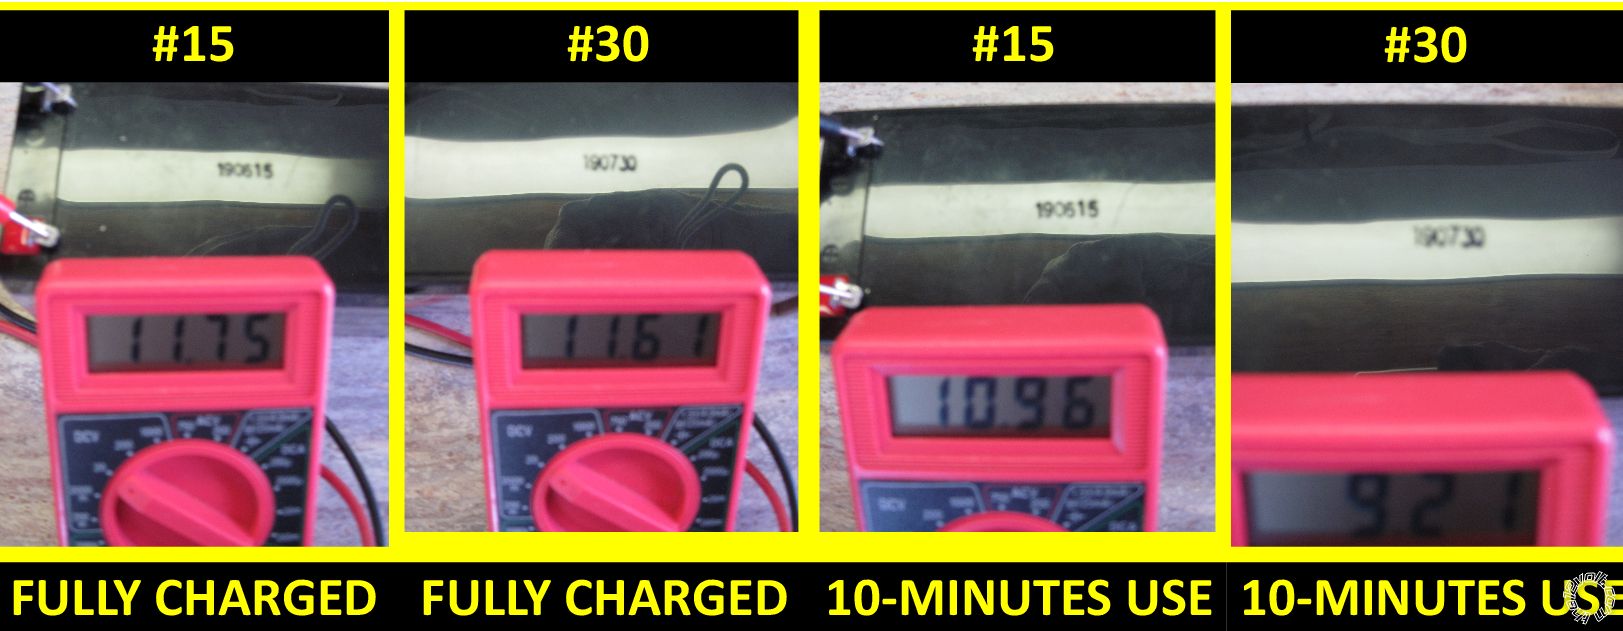 Two 12 Volt Batteries Usage Time? - Last Post -- posted image.